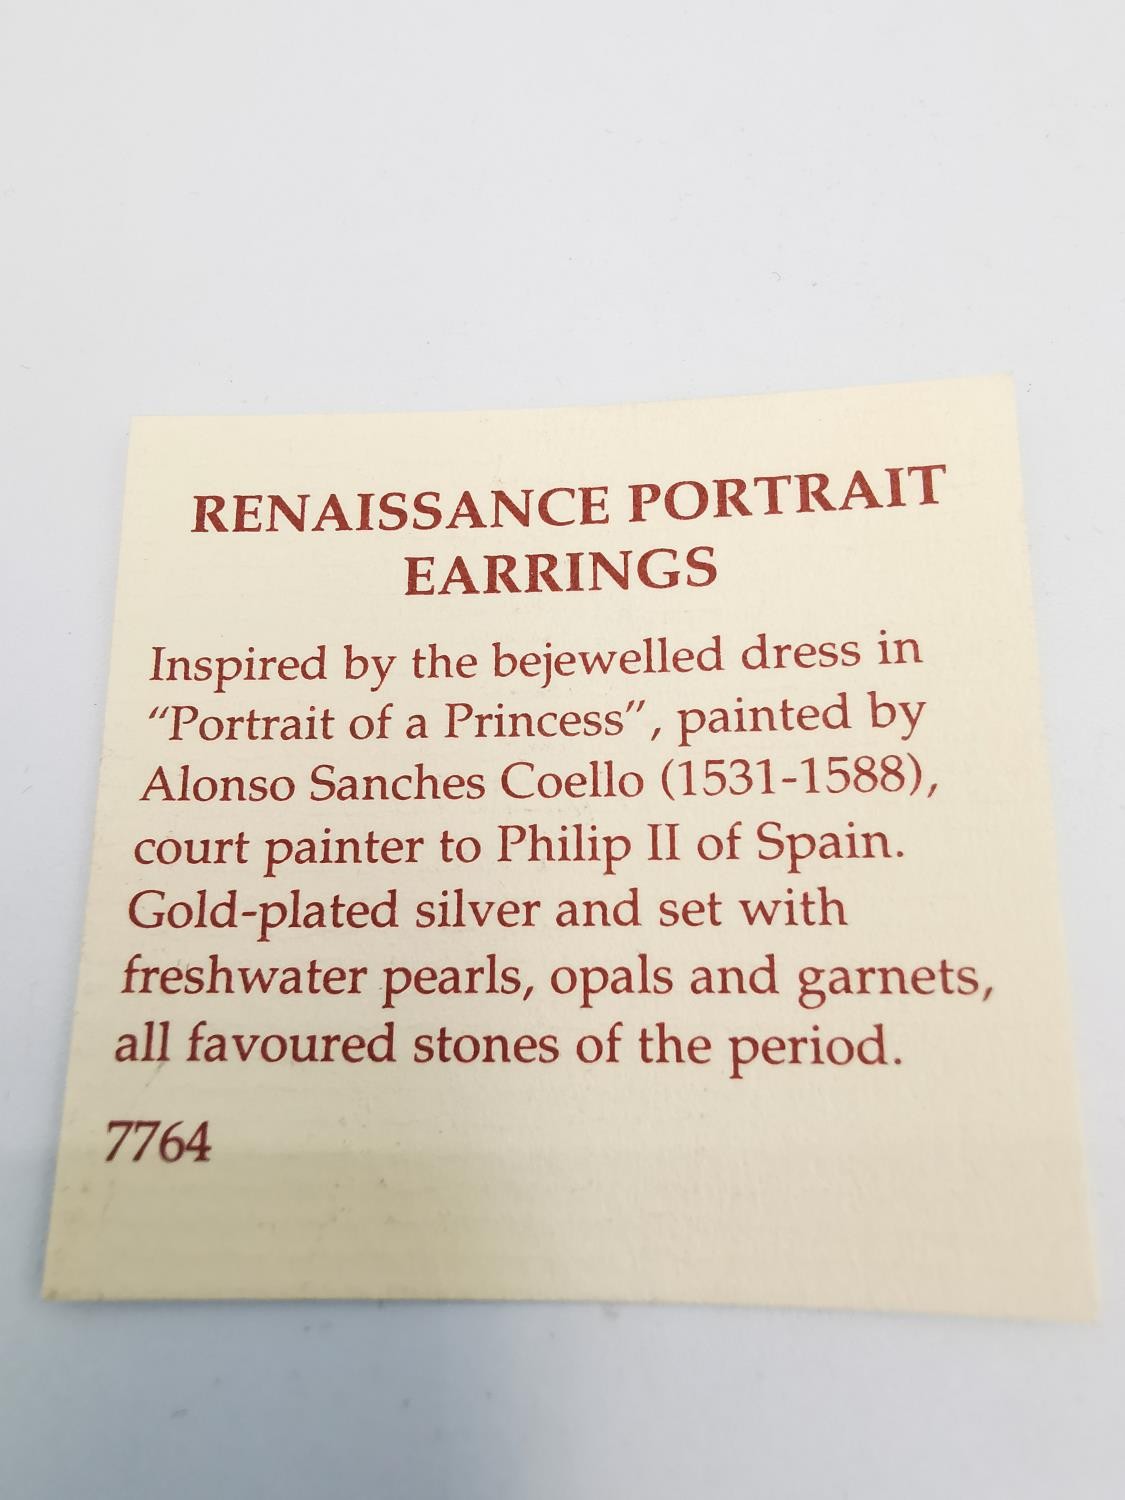 A pair of boxed Past Time replica silver gilt Renaissance portrait earrings, set with potato pearls, - Image 6 of 6